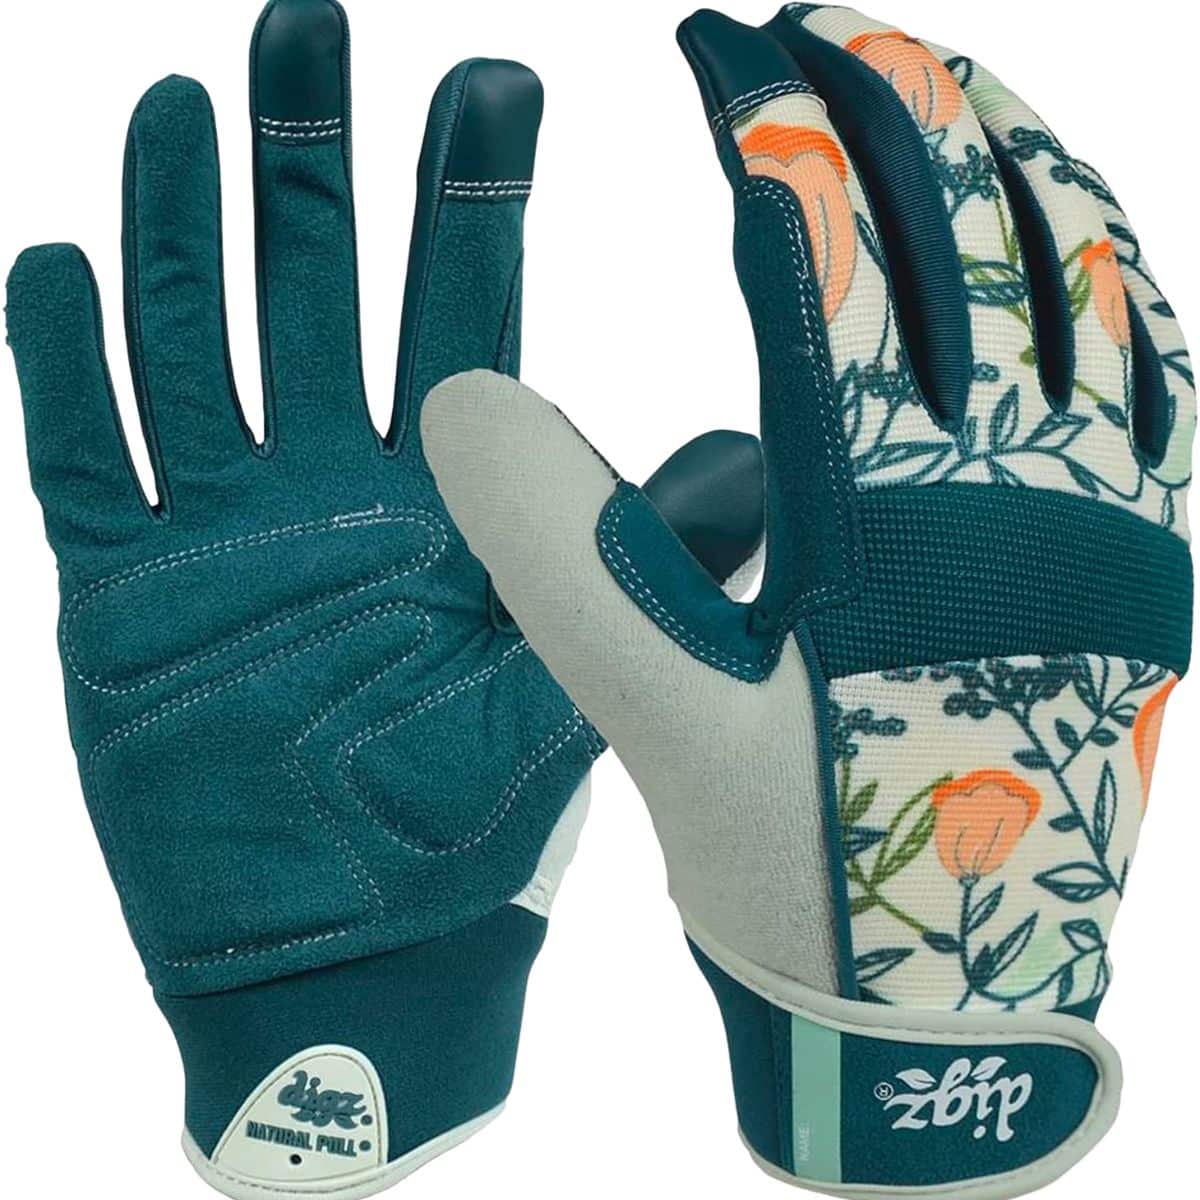 greenish blue garden gloves with coral floral design touch screen with wrist straps available at Amazon